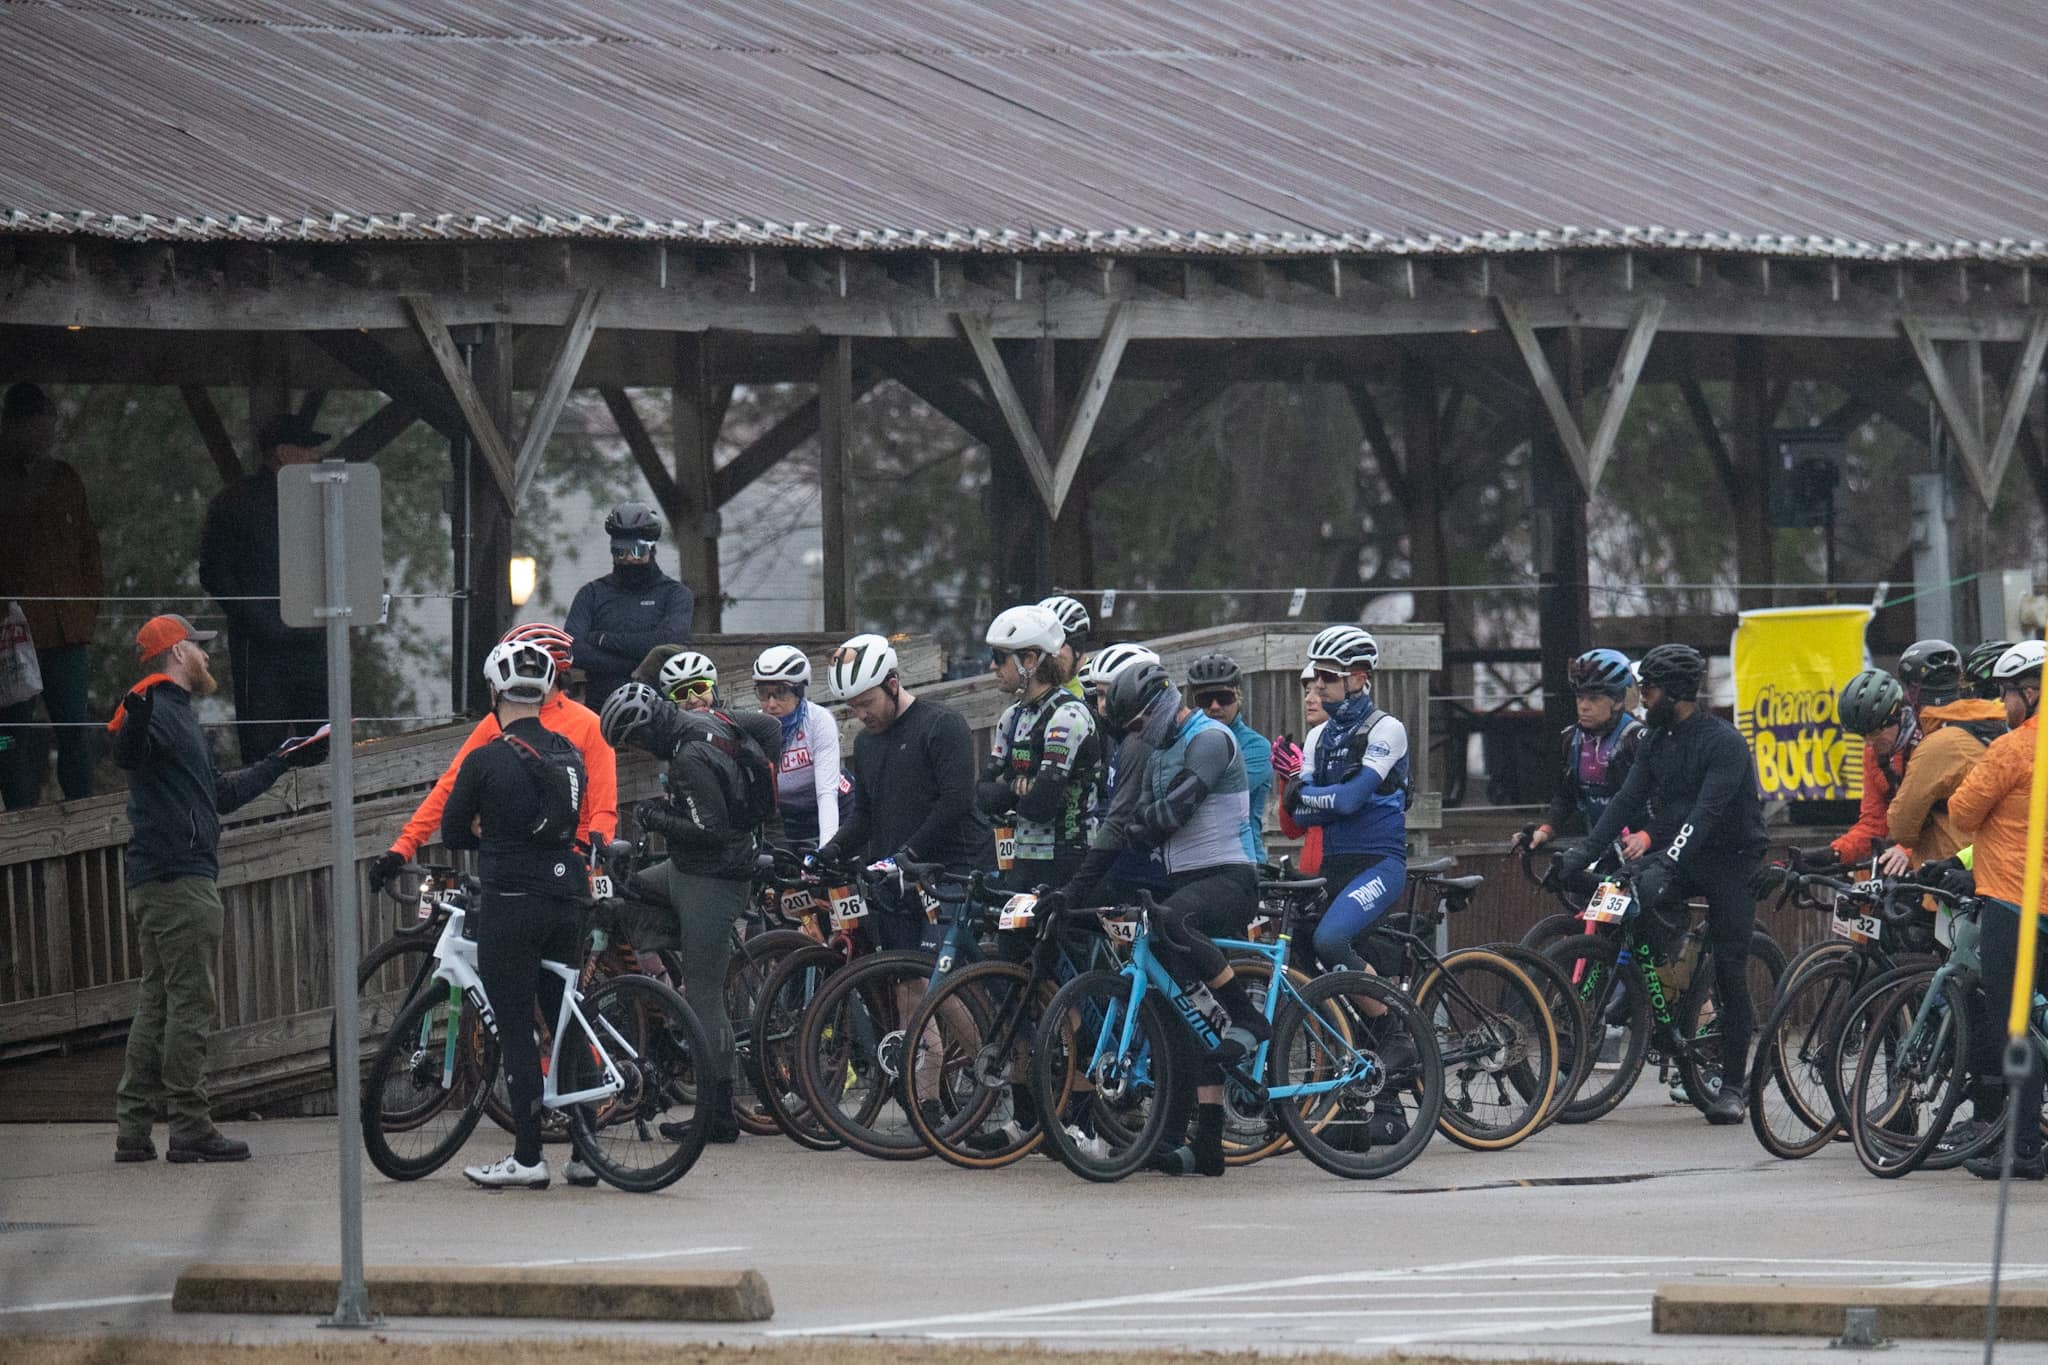 Riders lining up for a bike race.